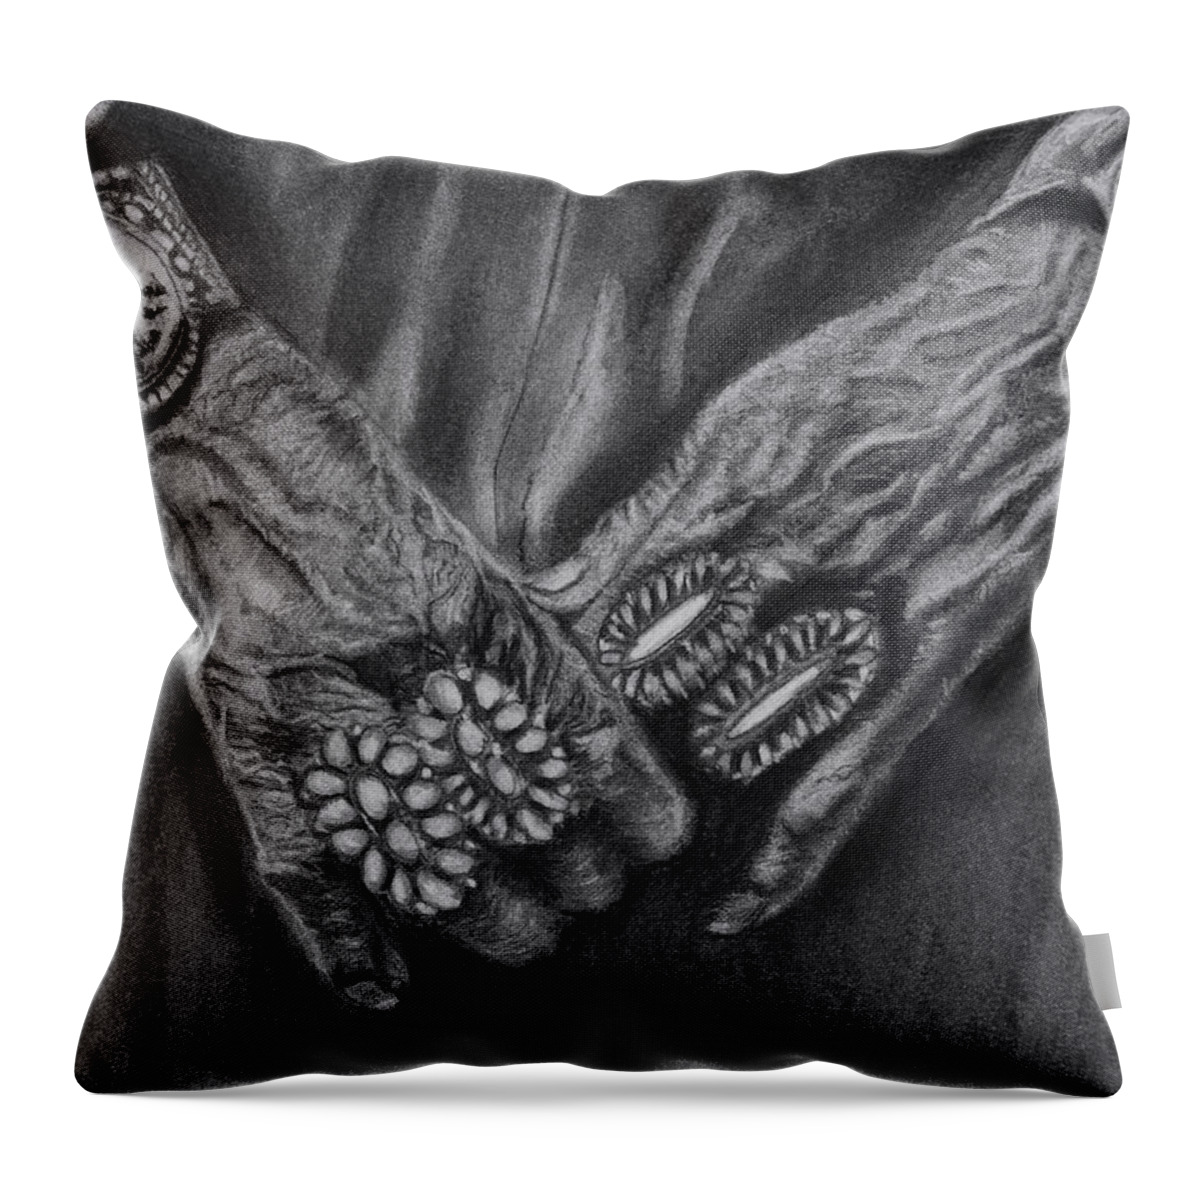 Grandmother Throw Pillow featuring the drawing Grandmother Hands by Sheila Johns